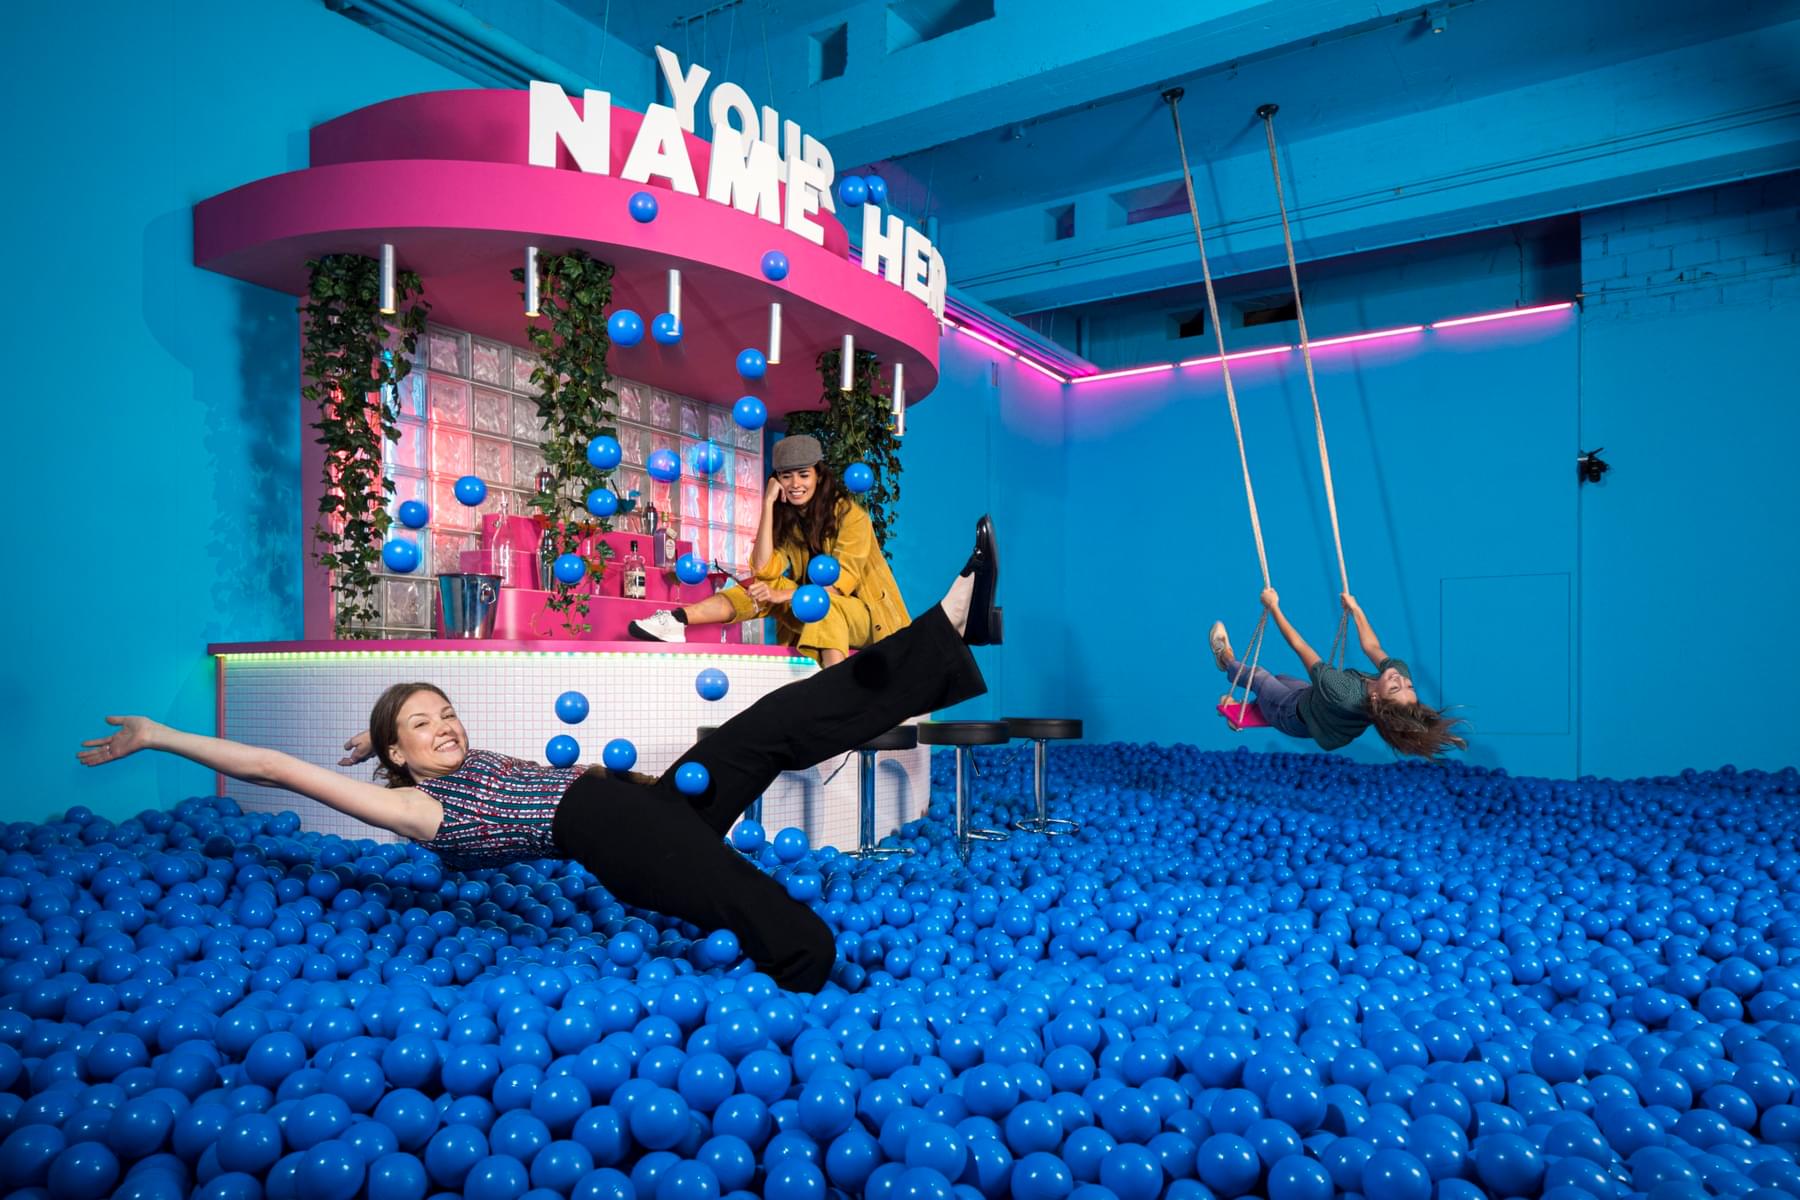 Jump into the giant ball-pit and click some fun photographs with your loved ones